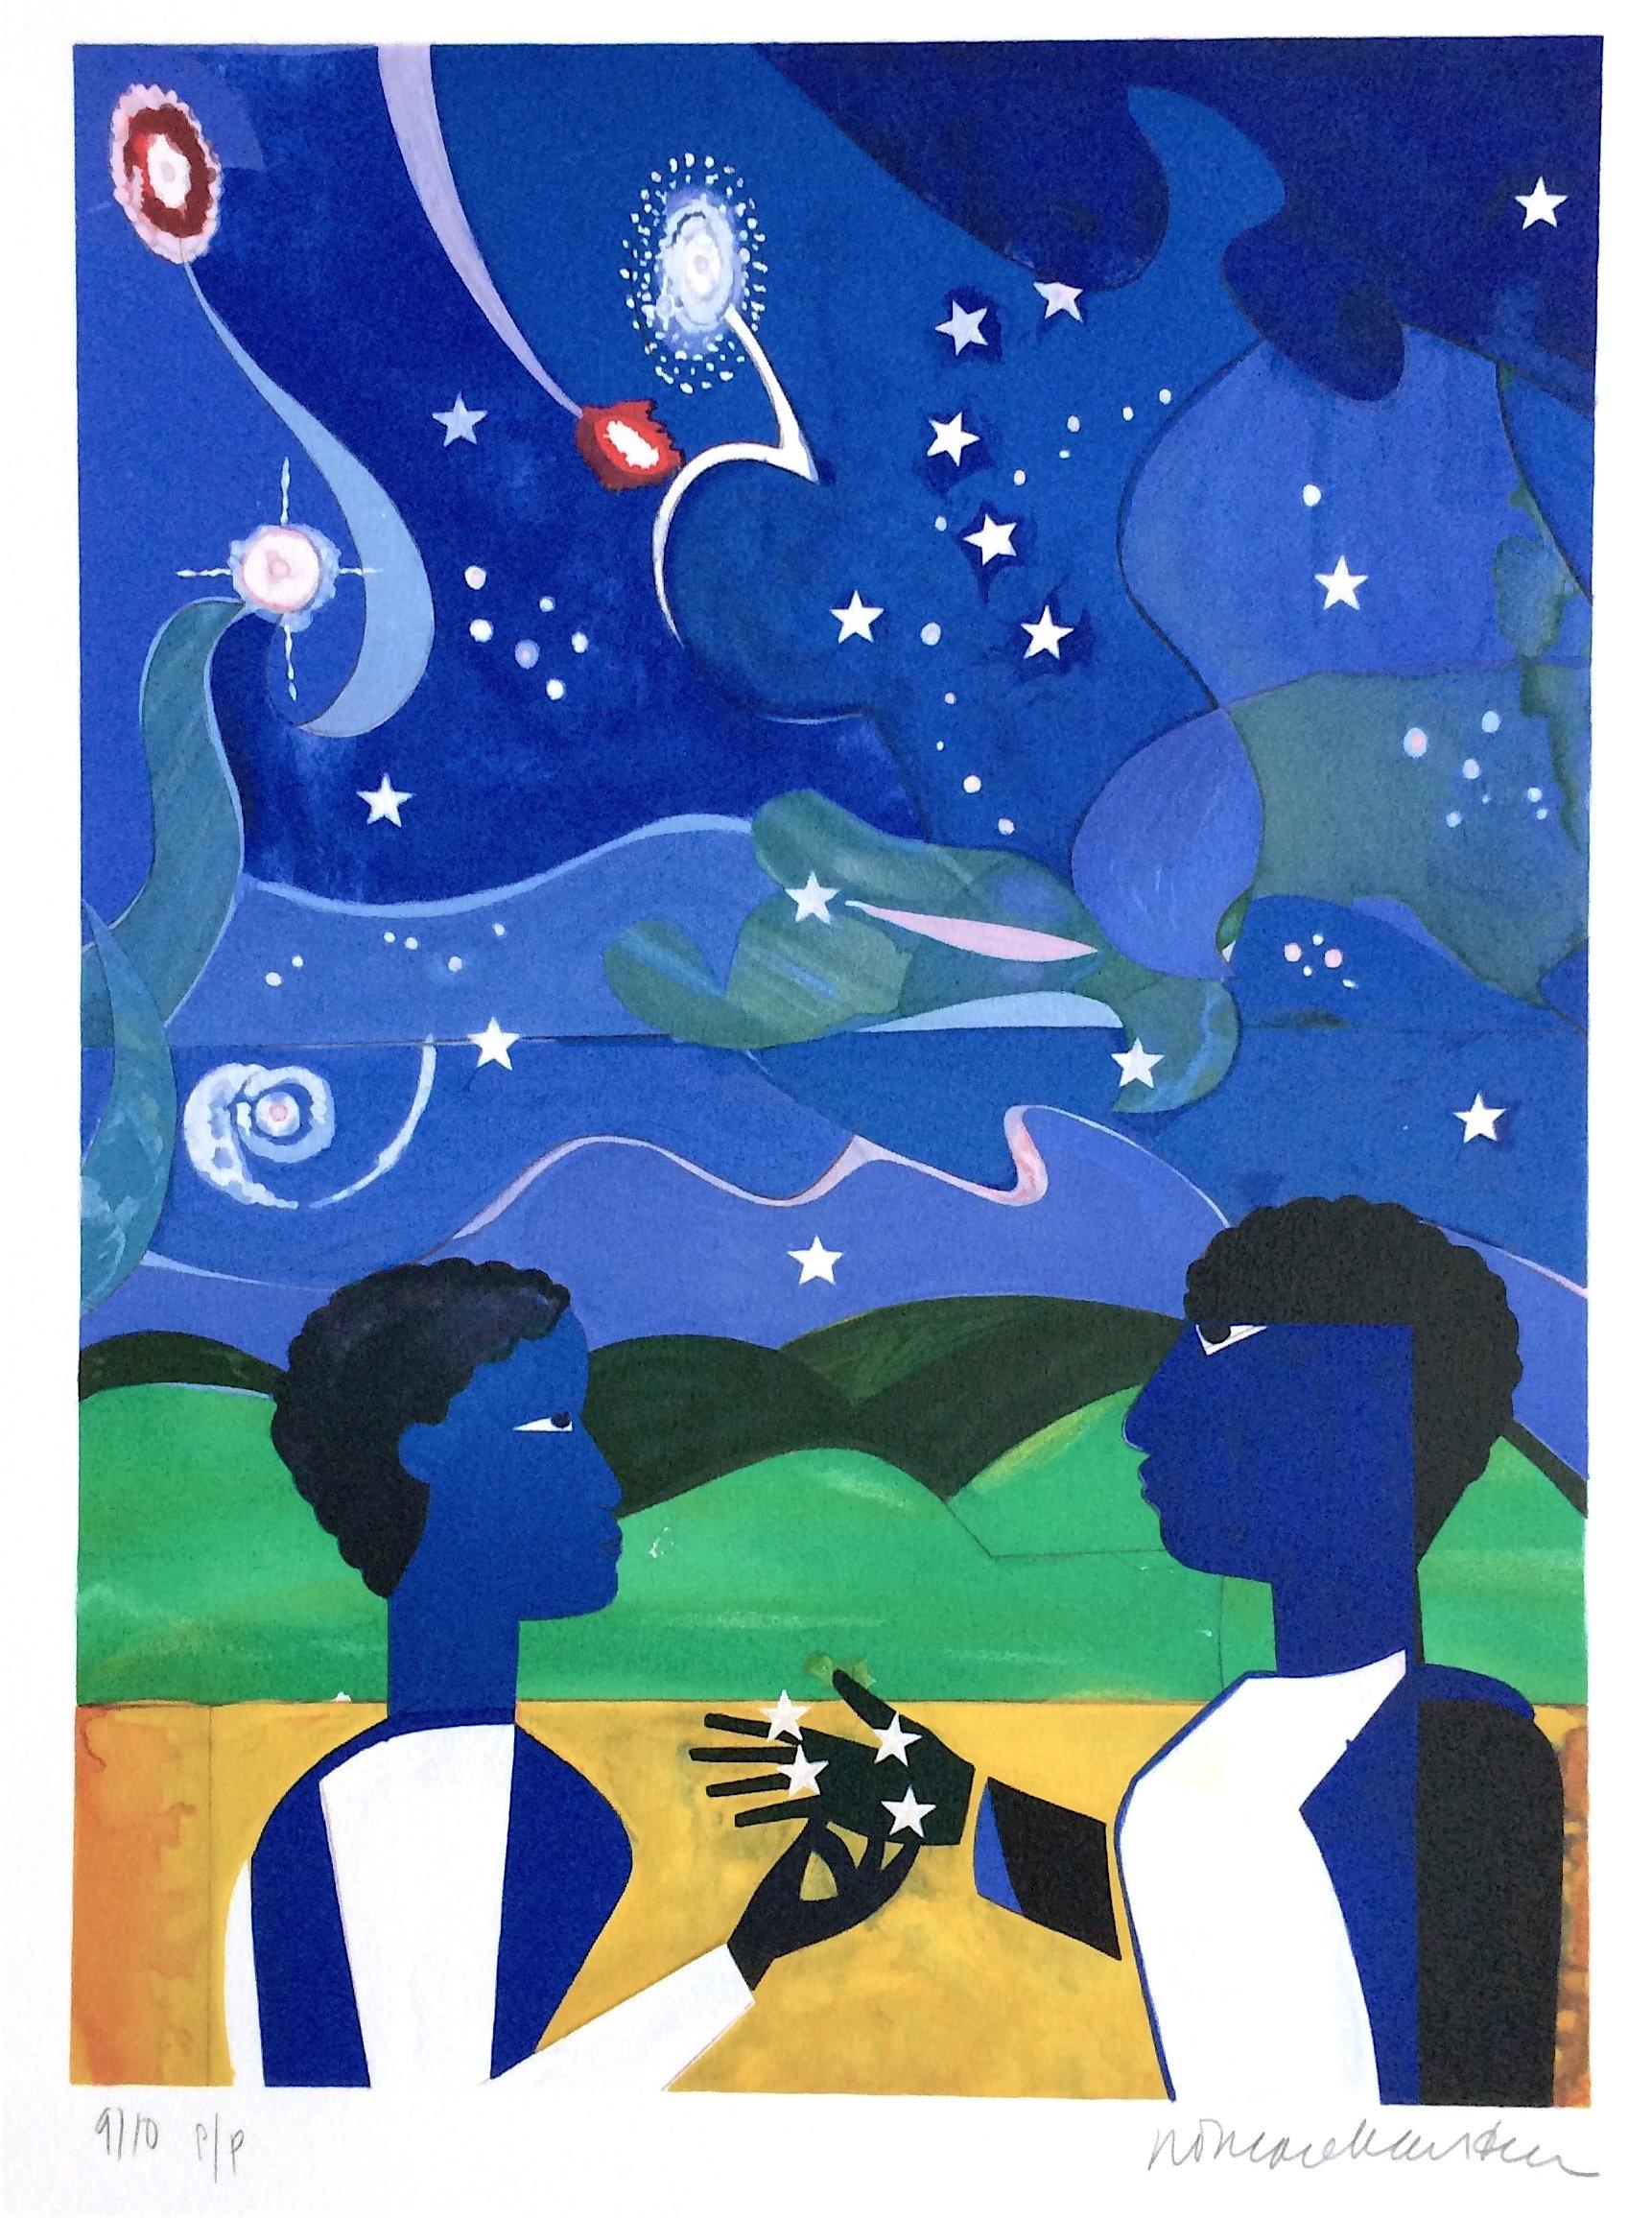 Romare Bearden Figurative Print - Two Worlds, Faces Of The Future, Signed Lithograph, Starry Night